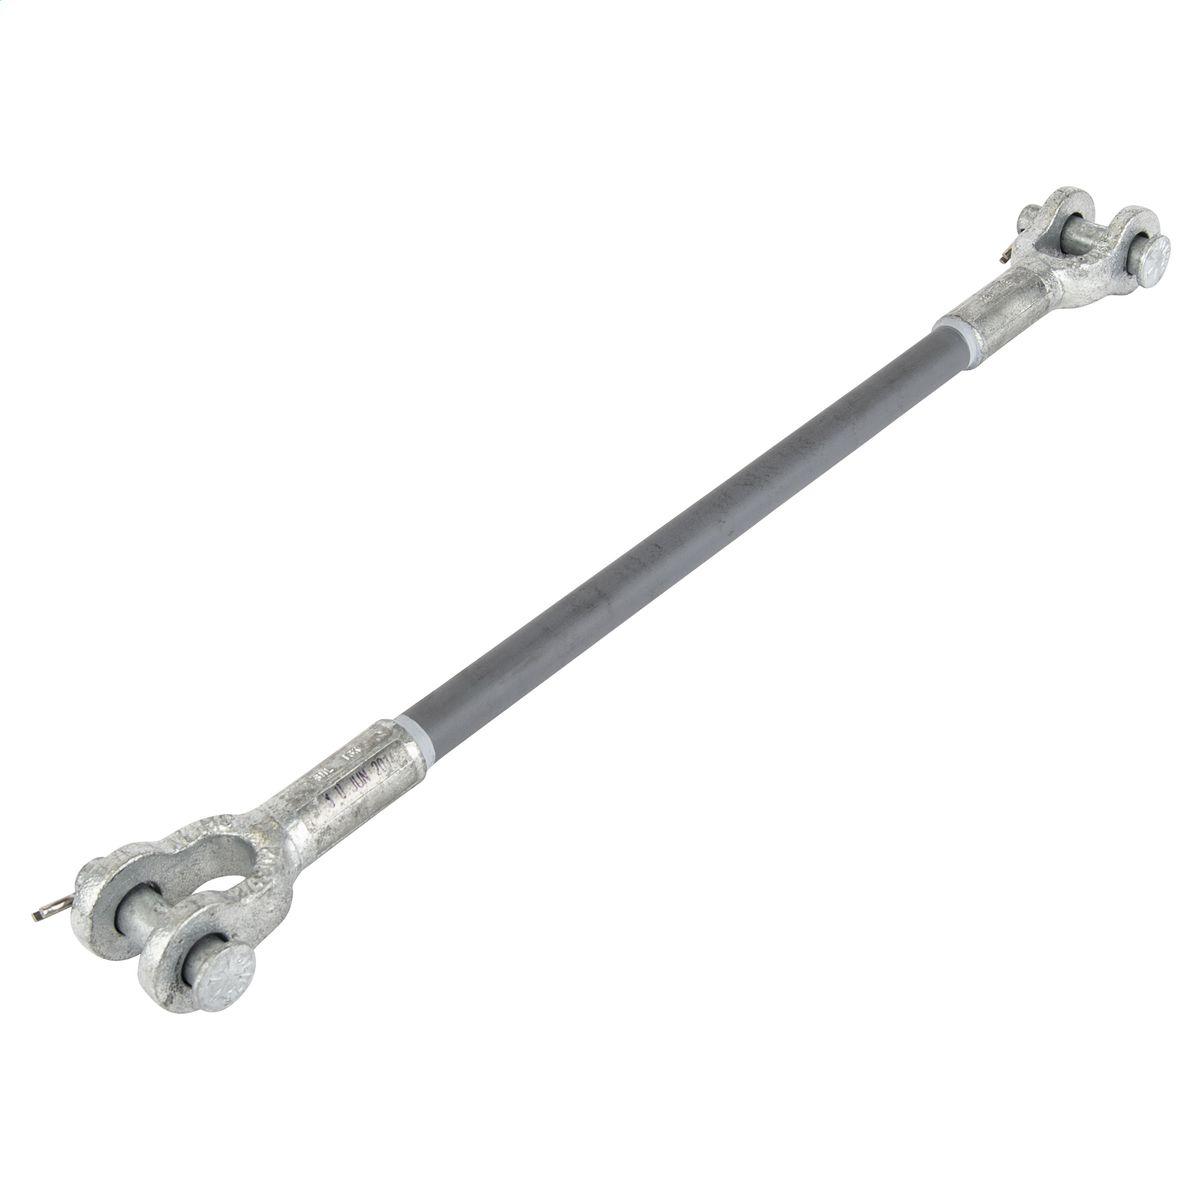 Hubbell GS36060CCSC 60" Silicone Coated Fiberglass Guy Strain; 36,000 lb Series; Clevis / Clevis 